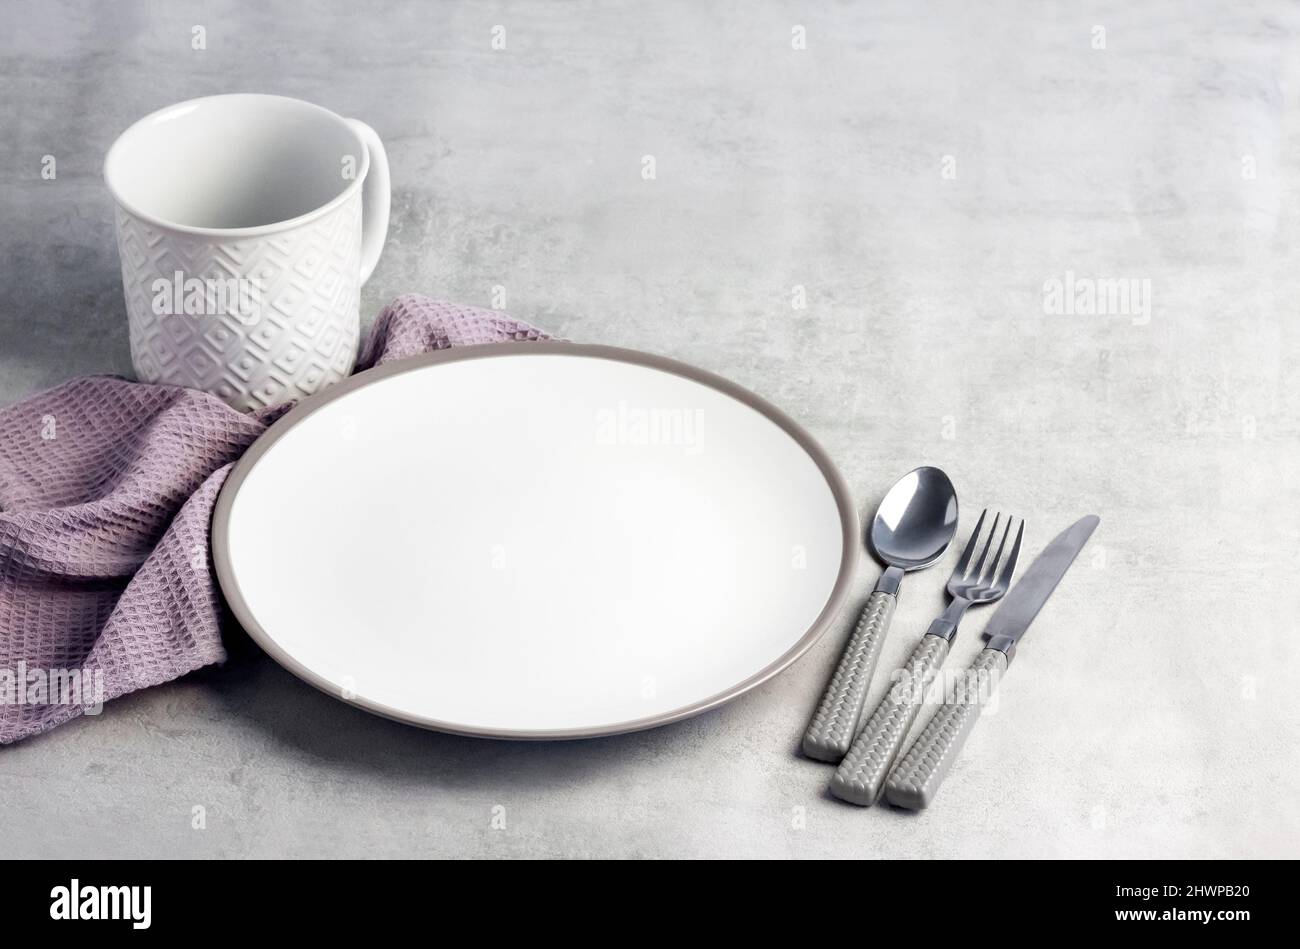 Table setting. White plate, mug, cutlery and napkin on light gray background. Stock Photo